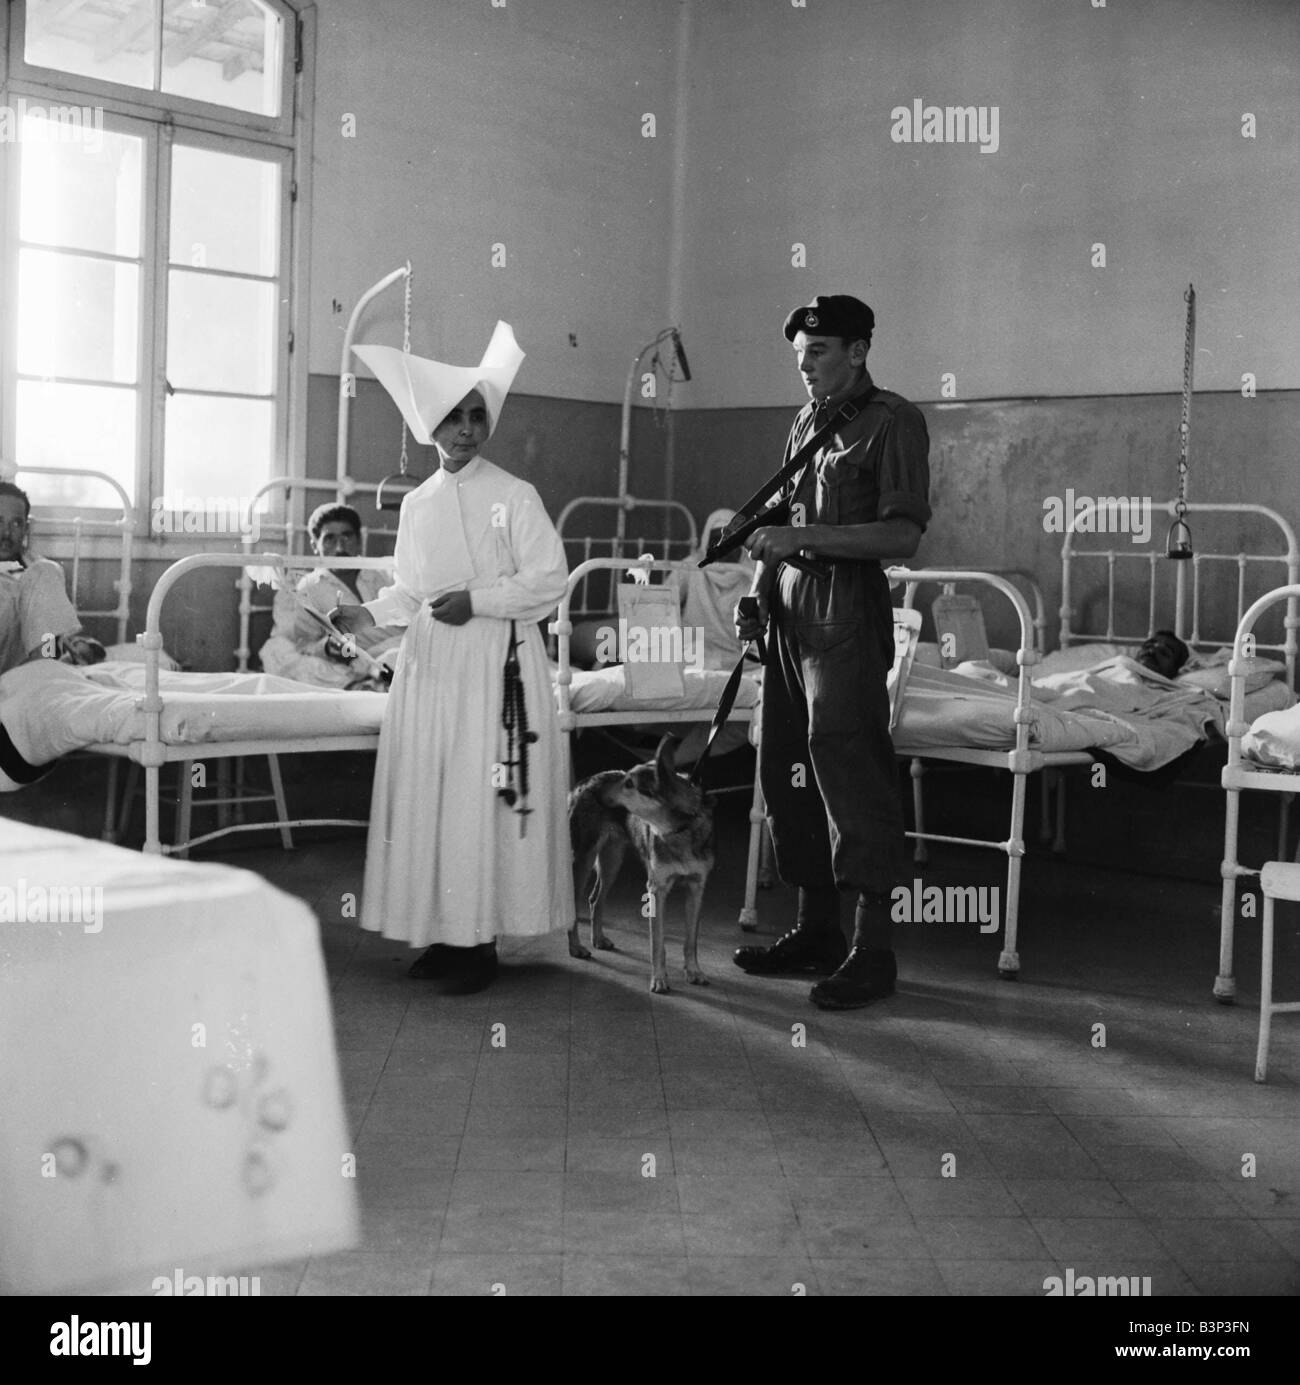 Suez Crisis 1956 Royal Marine Andrew Hall accompanies Sister Mary Joseph on her rounds at a hospital in Port Said Sister Mary from the Sister of Charity Convant in London has tended the sick at the hosptal for three years The armed guard was assigned to her after she received death threats for tipping off the British army that fifty rifles and a large quantity of ammunition were hidden in a clothes store Stock Photo